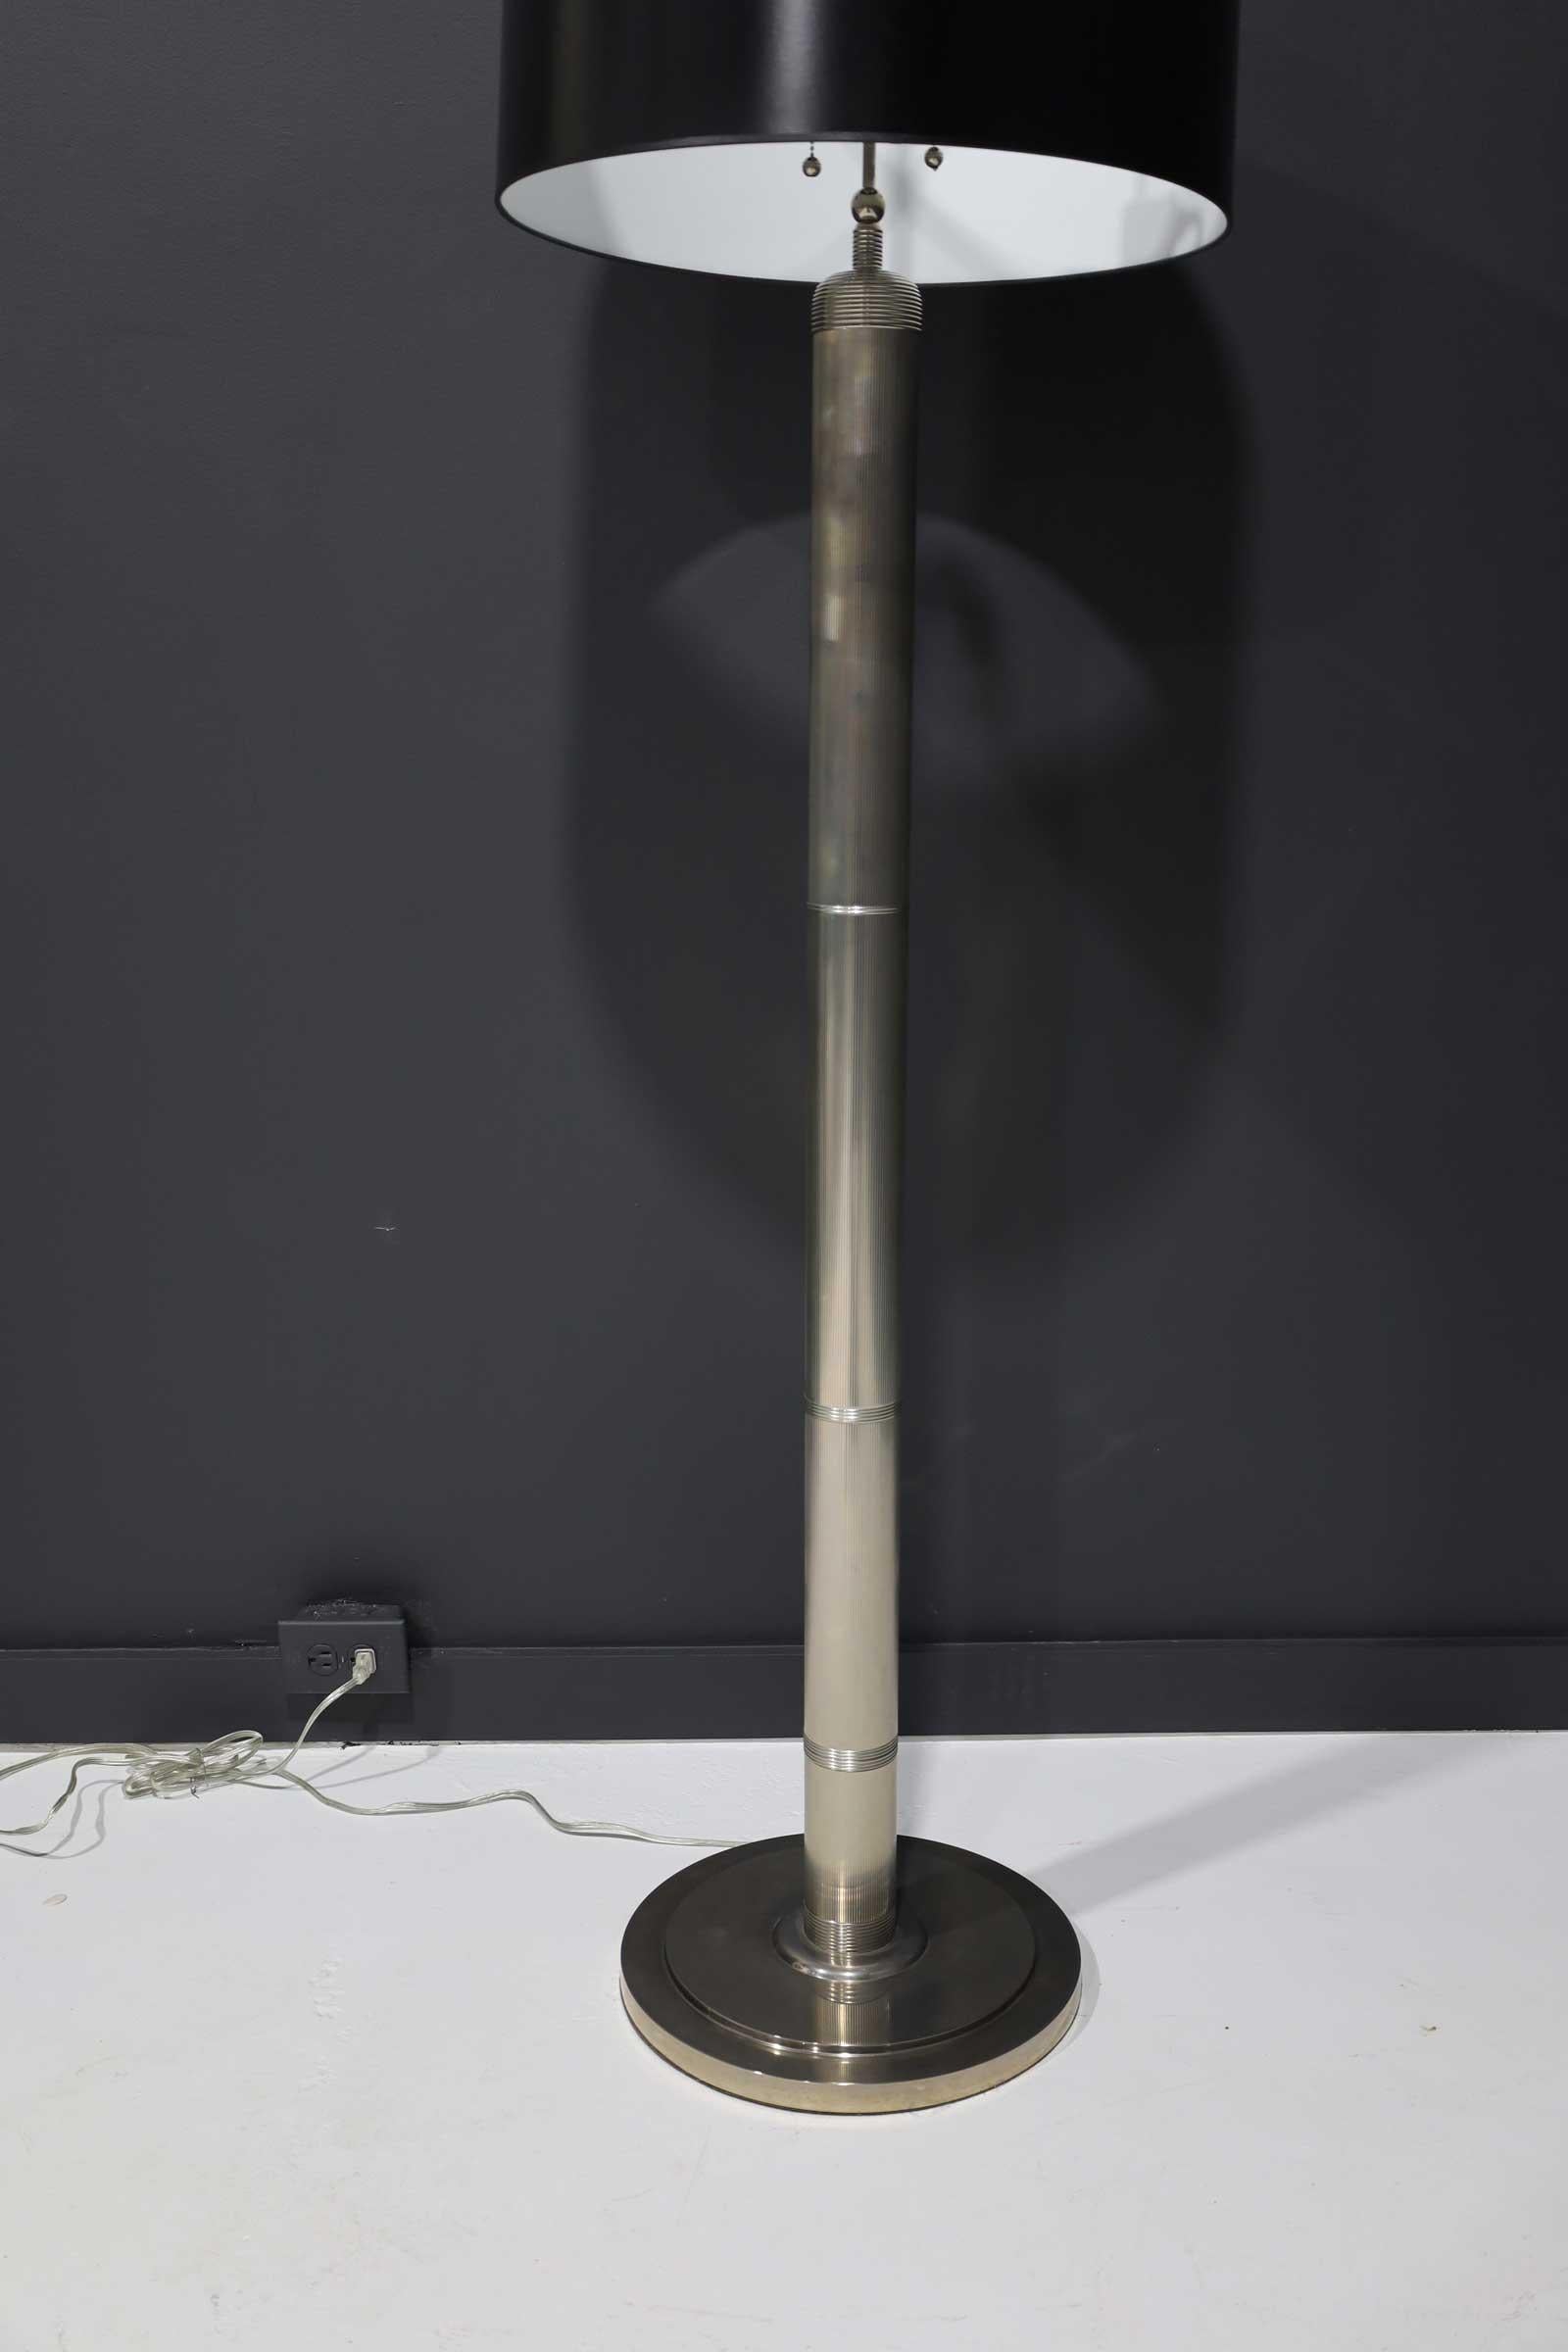 North American Long Acre Floor Lamp by Thomas O'Brien for Visual Comfort